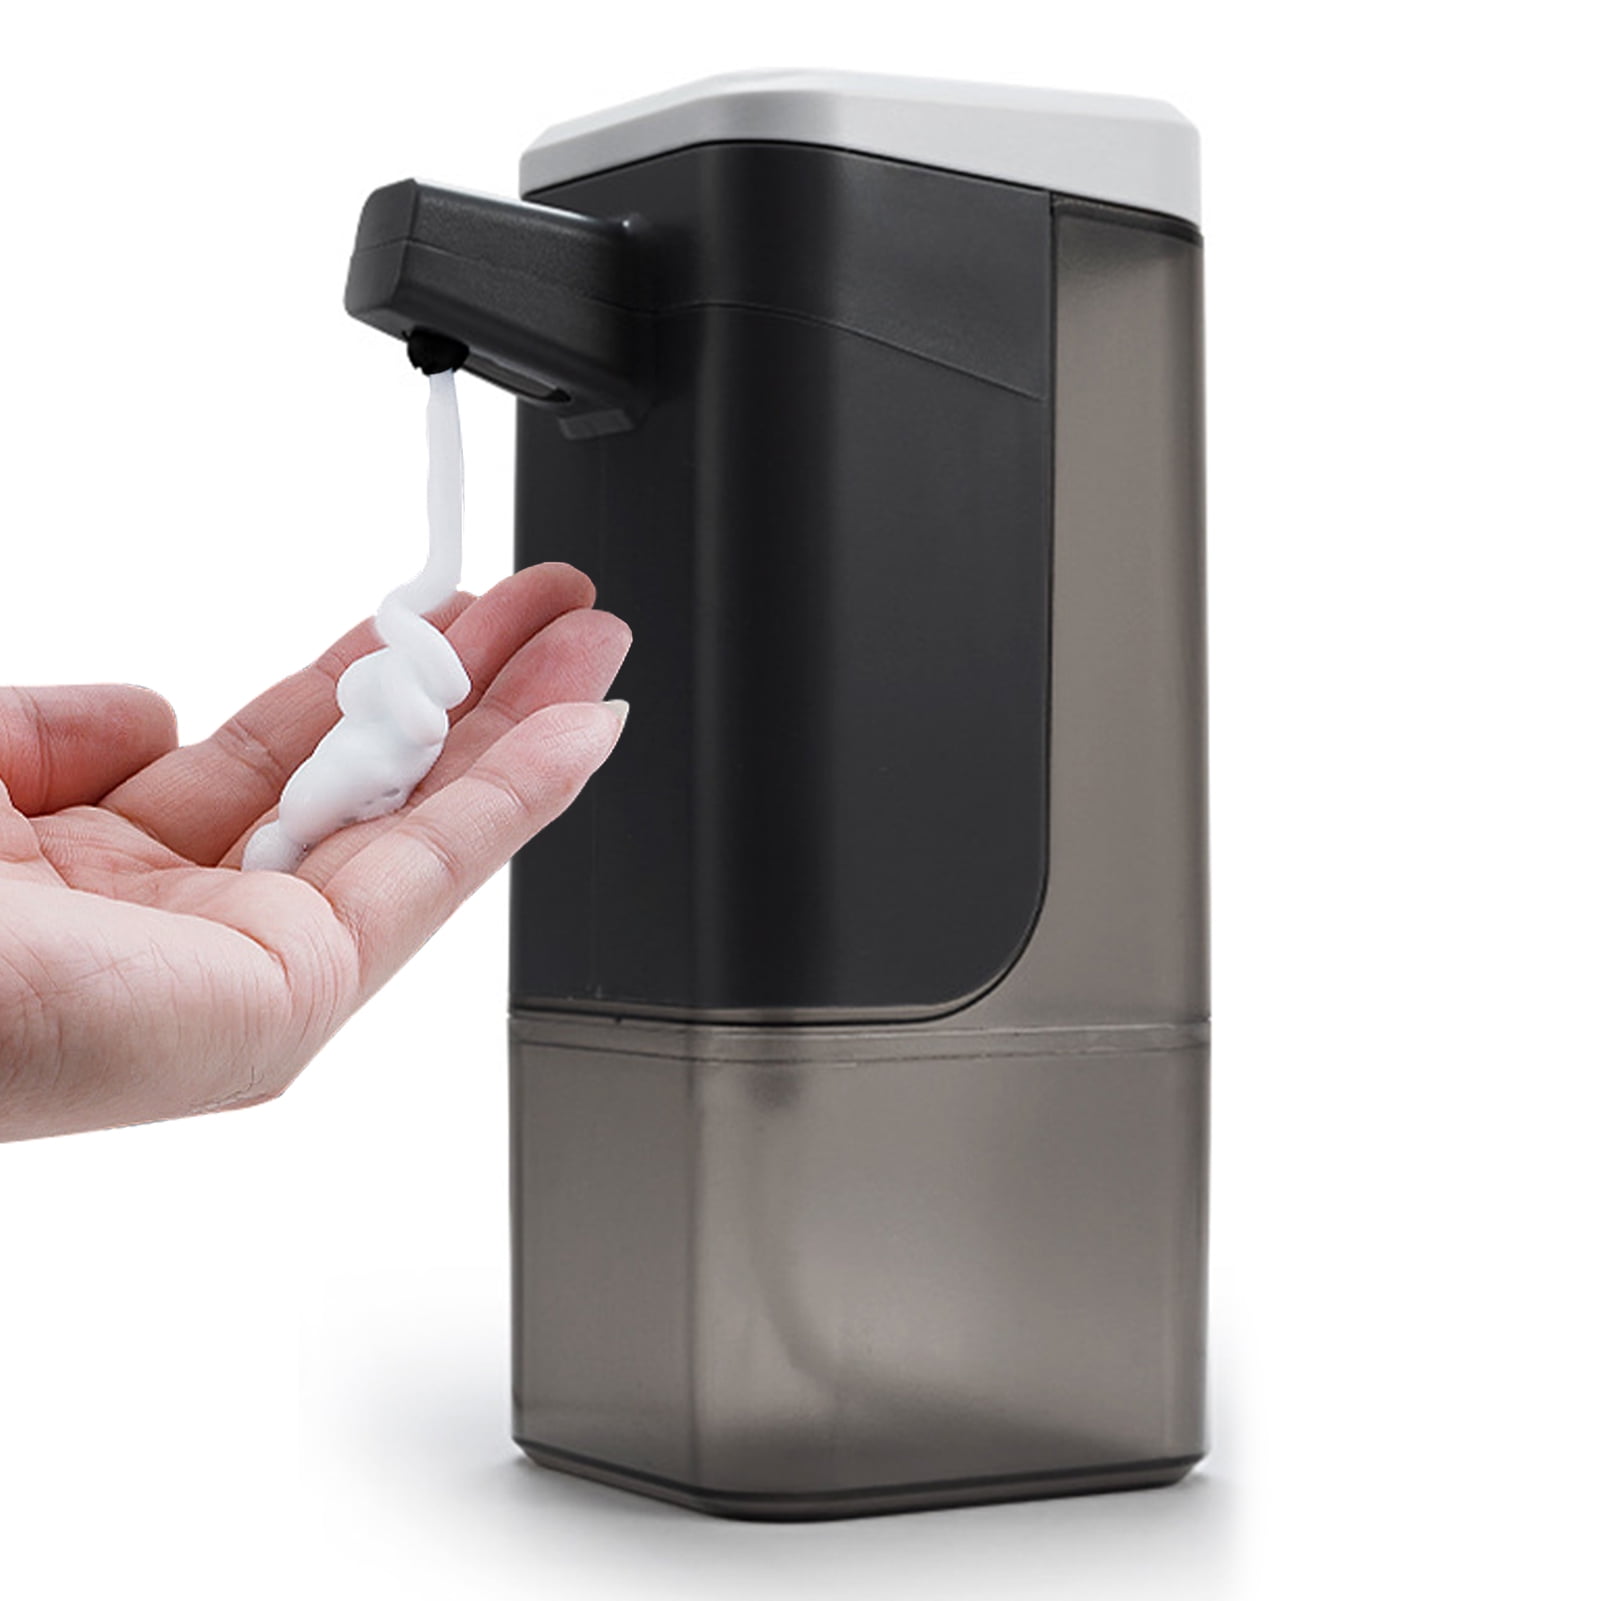 Infrared Automatic Soap Dispenser Touchless Hand Soap Holder 600ml for Restroom 